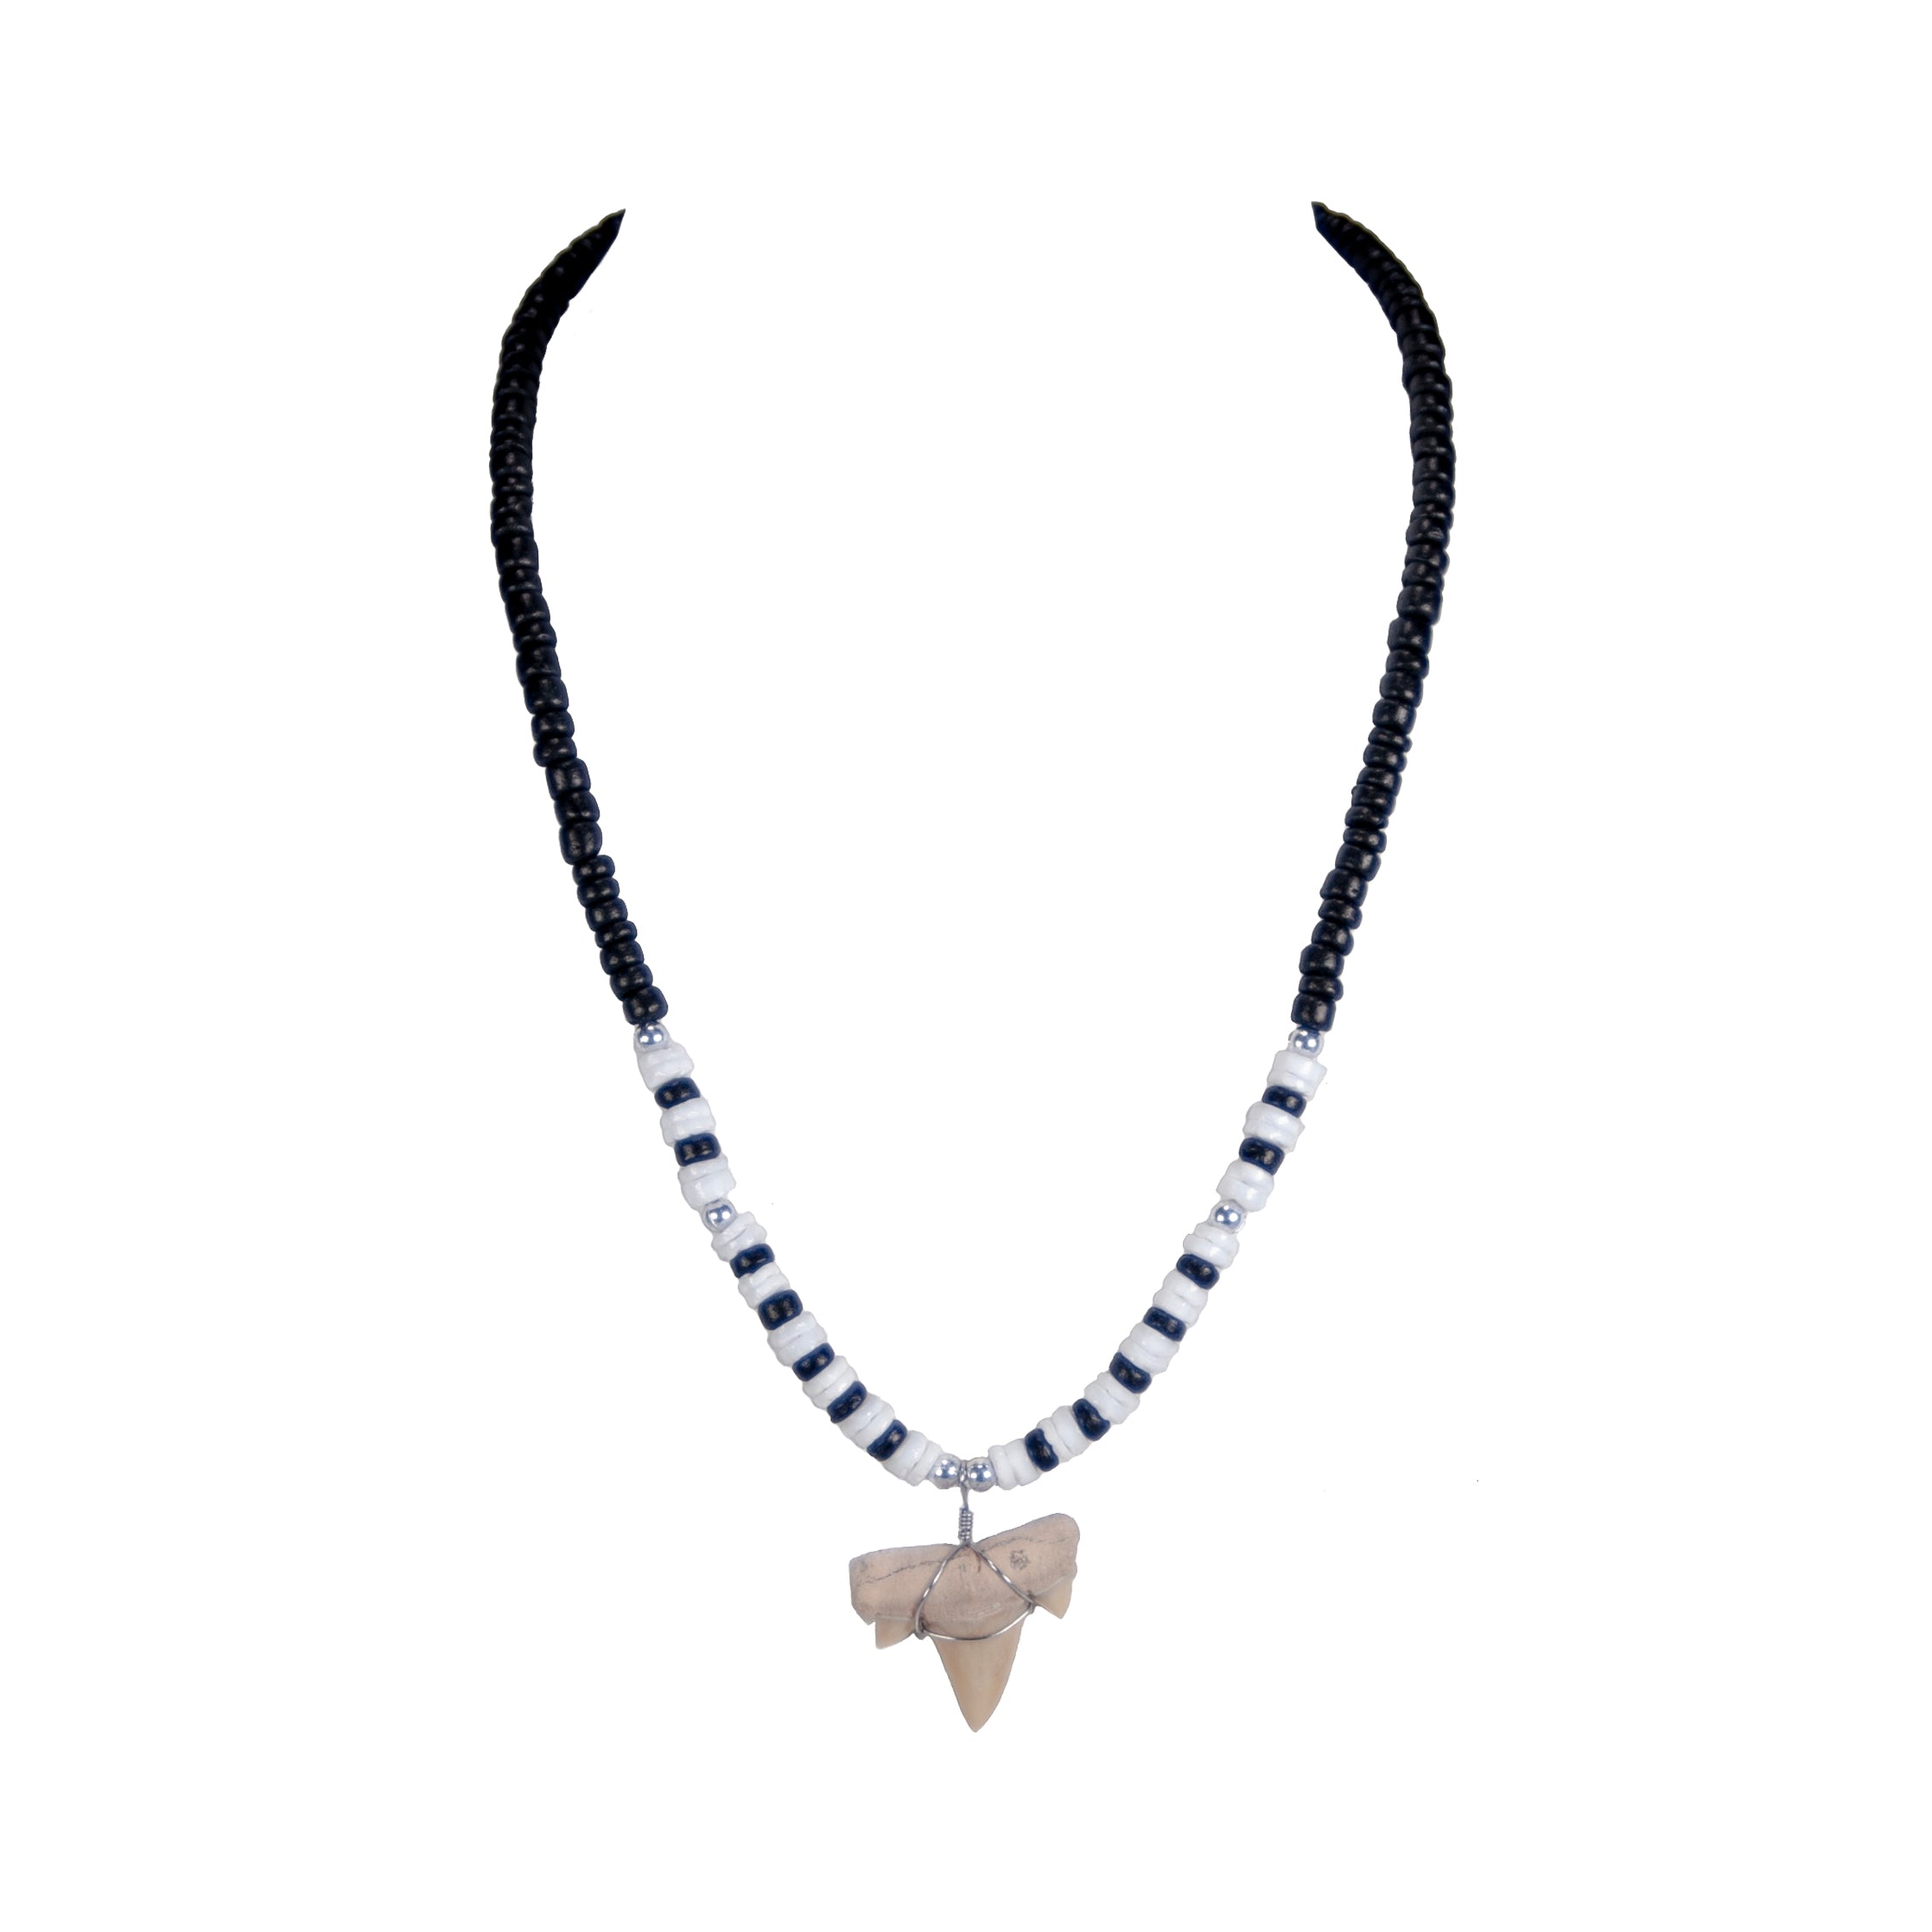 1"+ Shark Tooth Pendant on Black Coconut and Puka Shell Beads Necklace